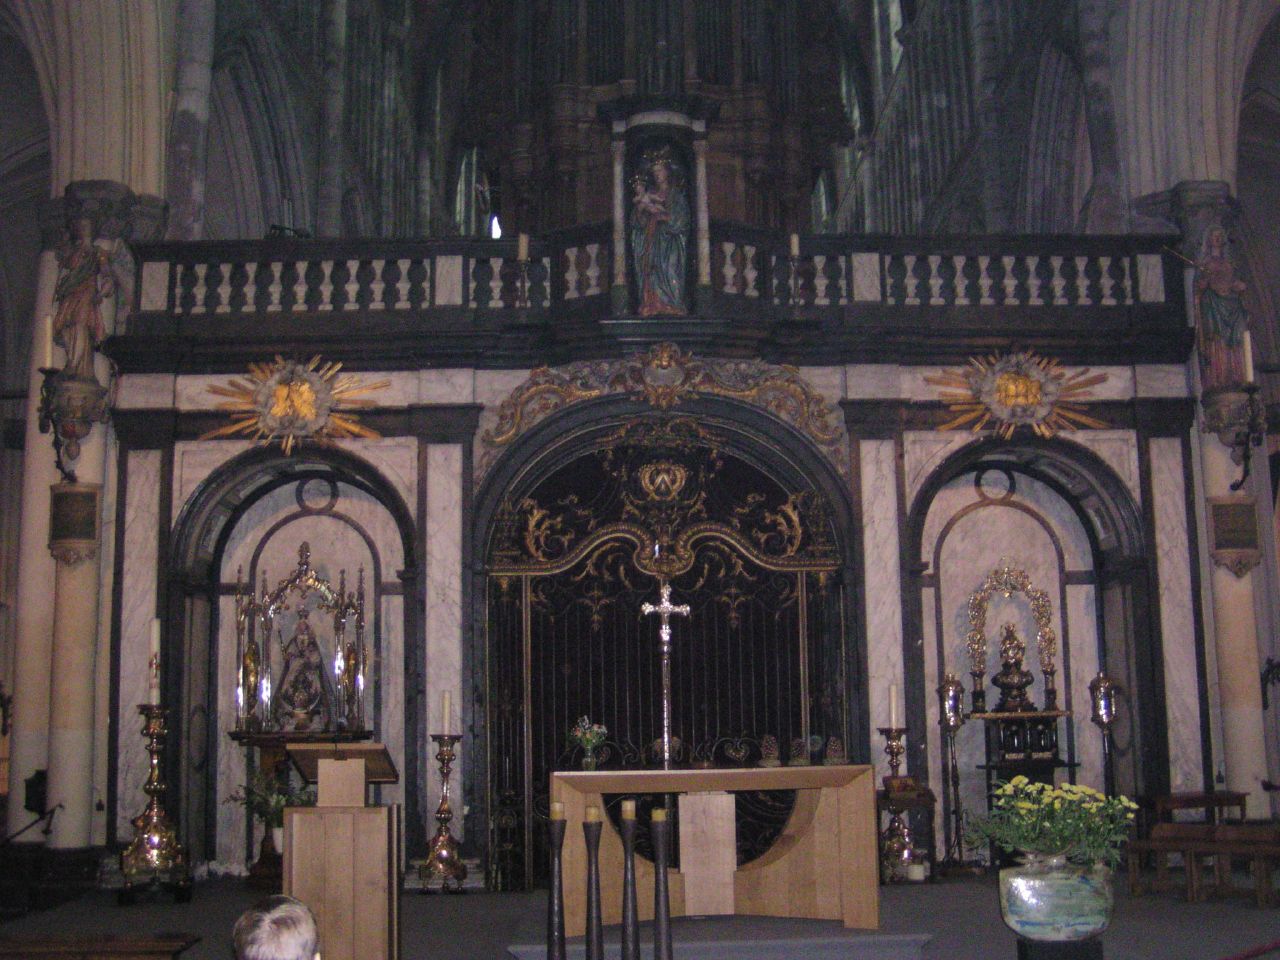 the altar inside the church is decorated with flowers